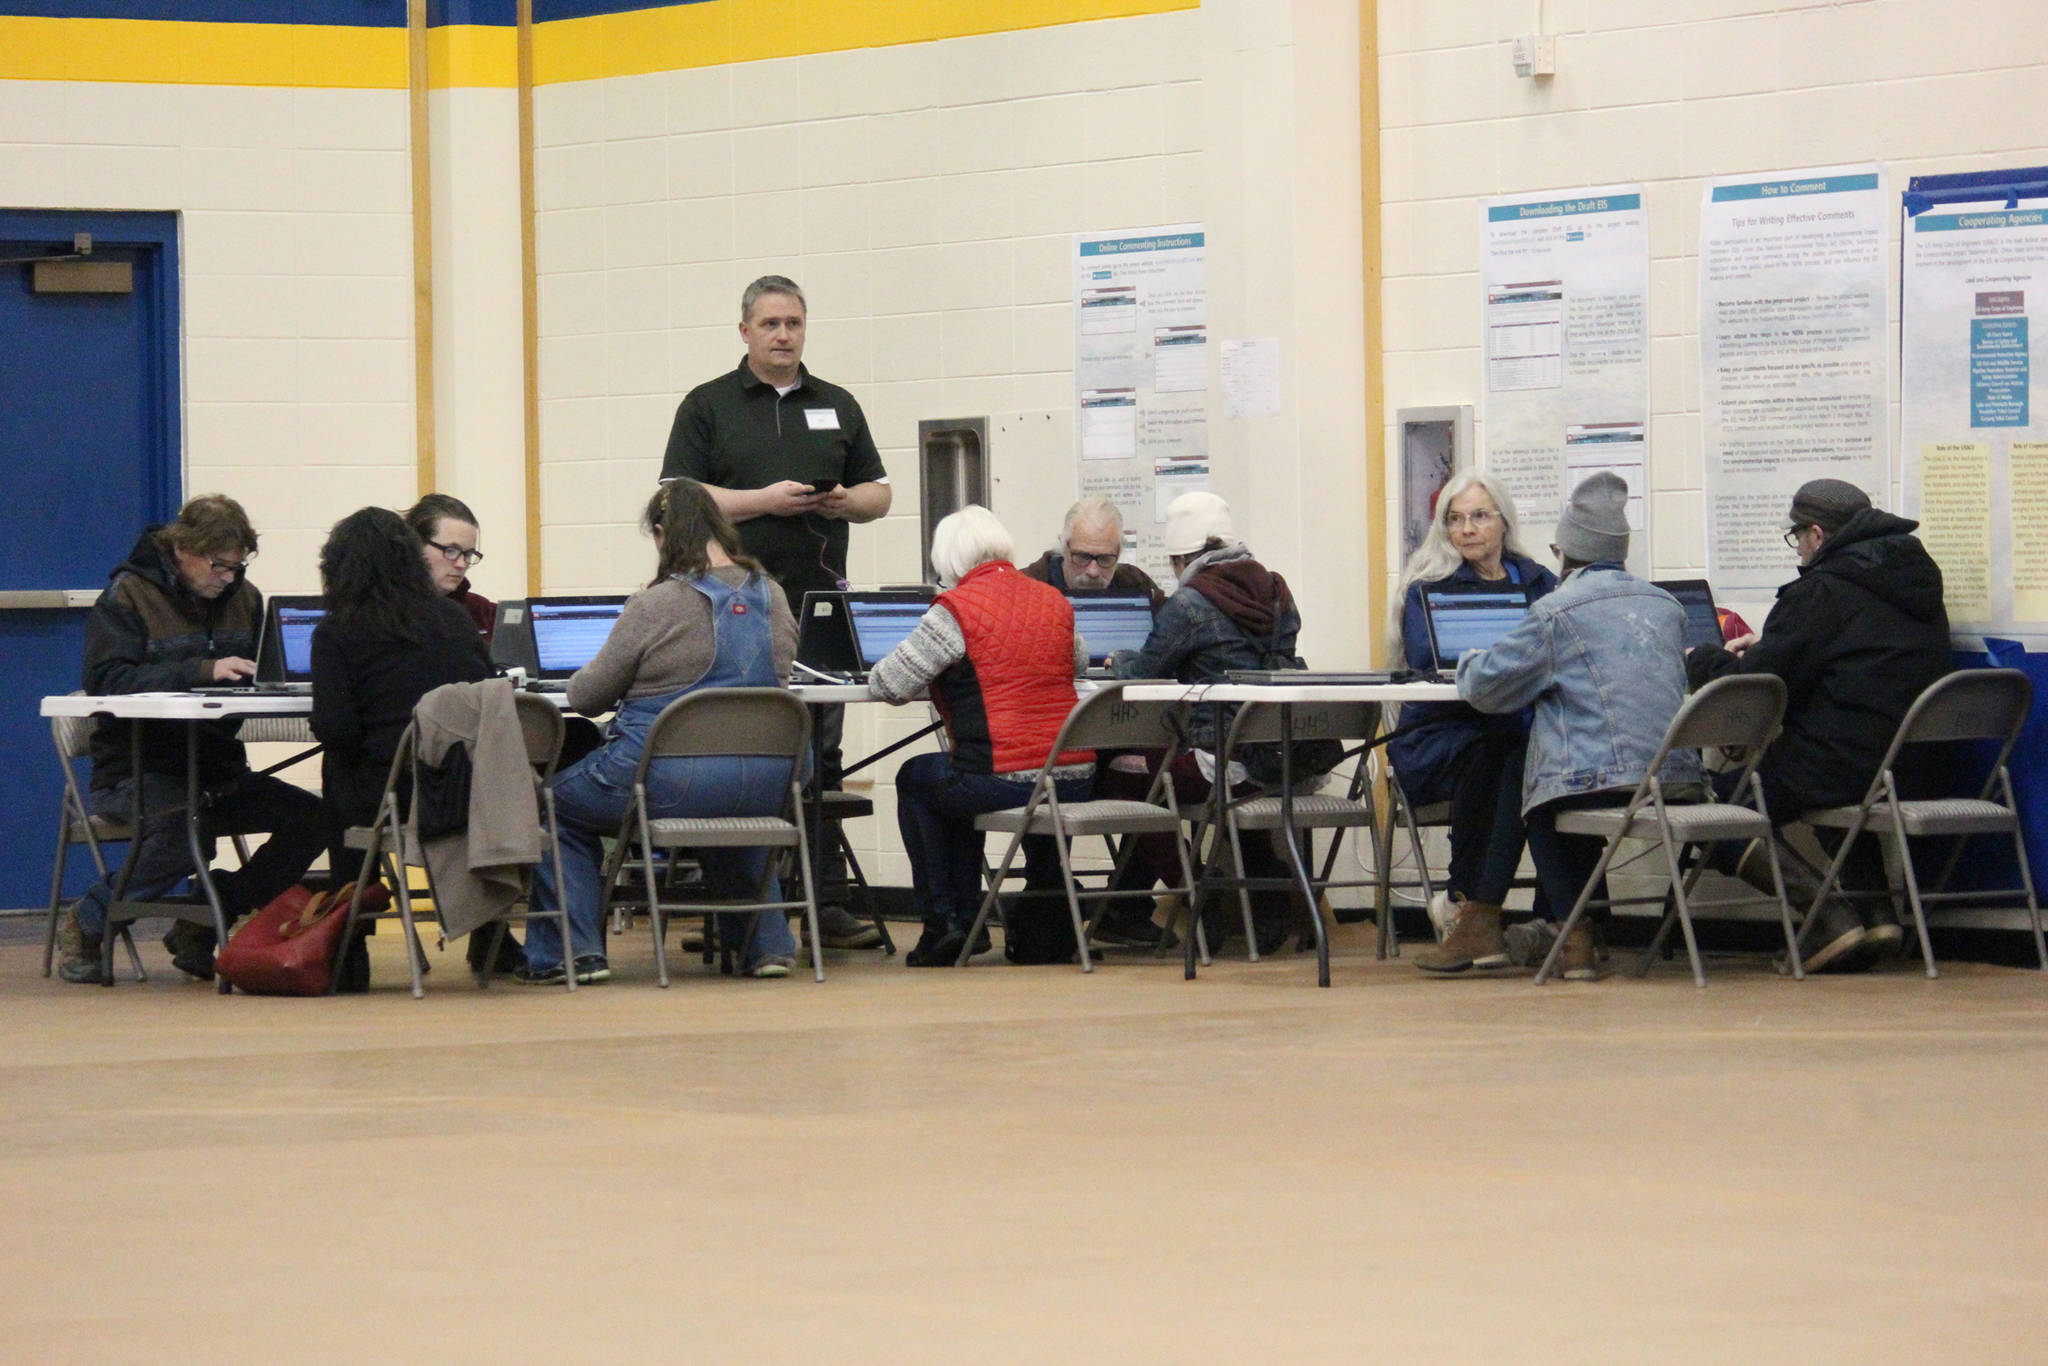 Community members submit comments about the Draft EIS for the proposed Pebble Mine to the Army Crops of Engineers through computers set up at an April 11, 2019 public hearing at Homer High School in Homer, Alaska. (Photo by Megan Pacer/Homer News)